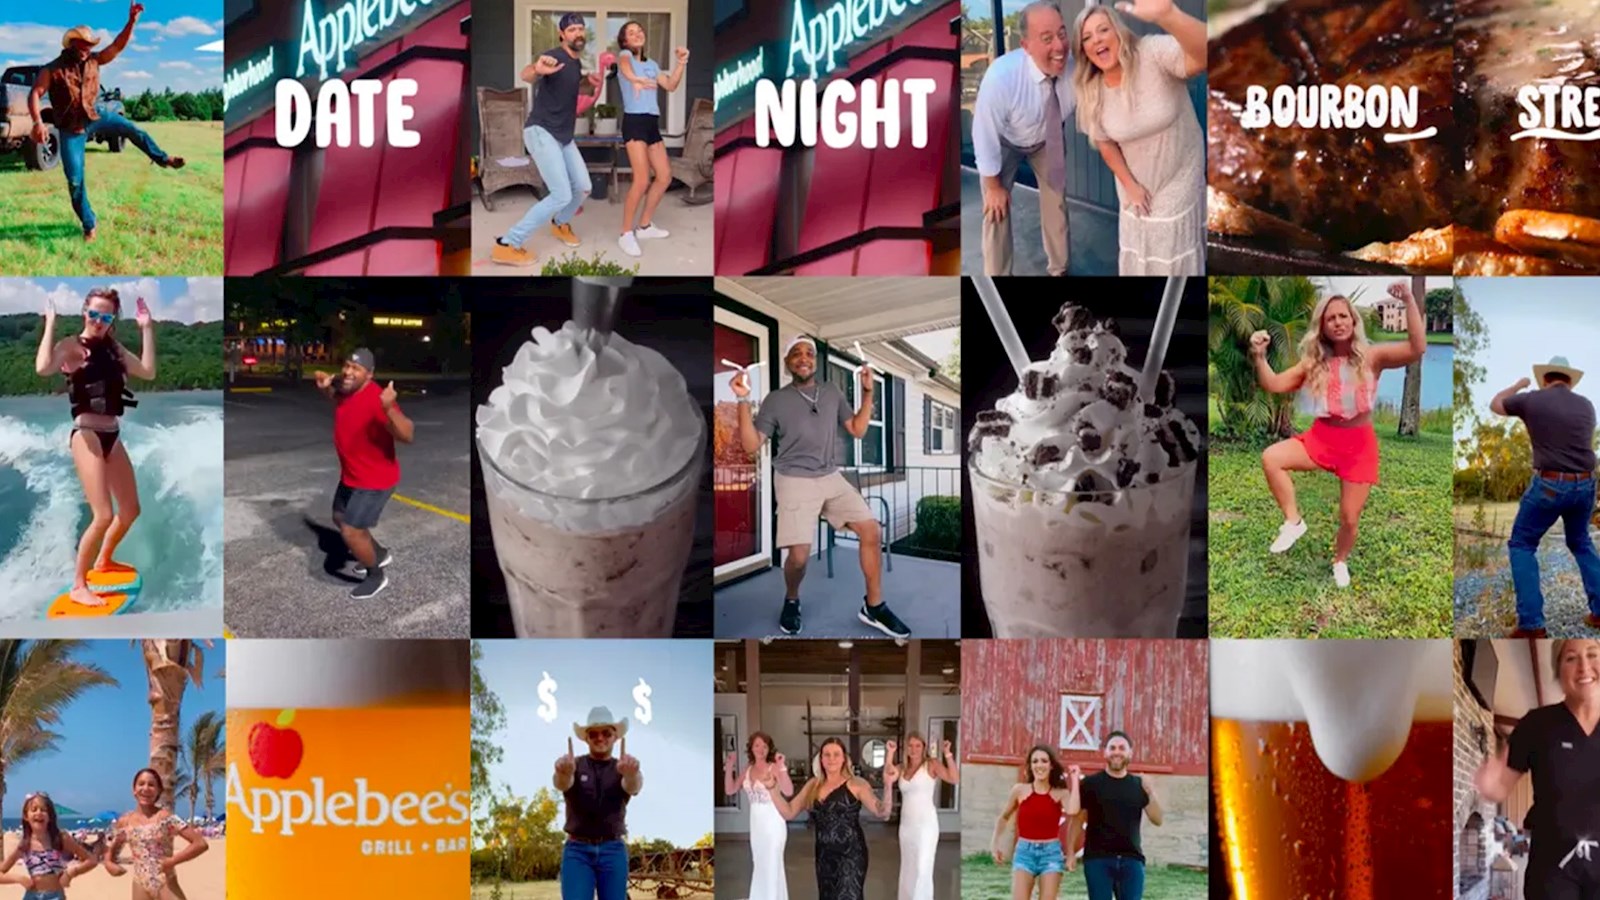 Collage of social media posts from the Applebees "Fancy like" campaign